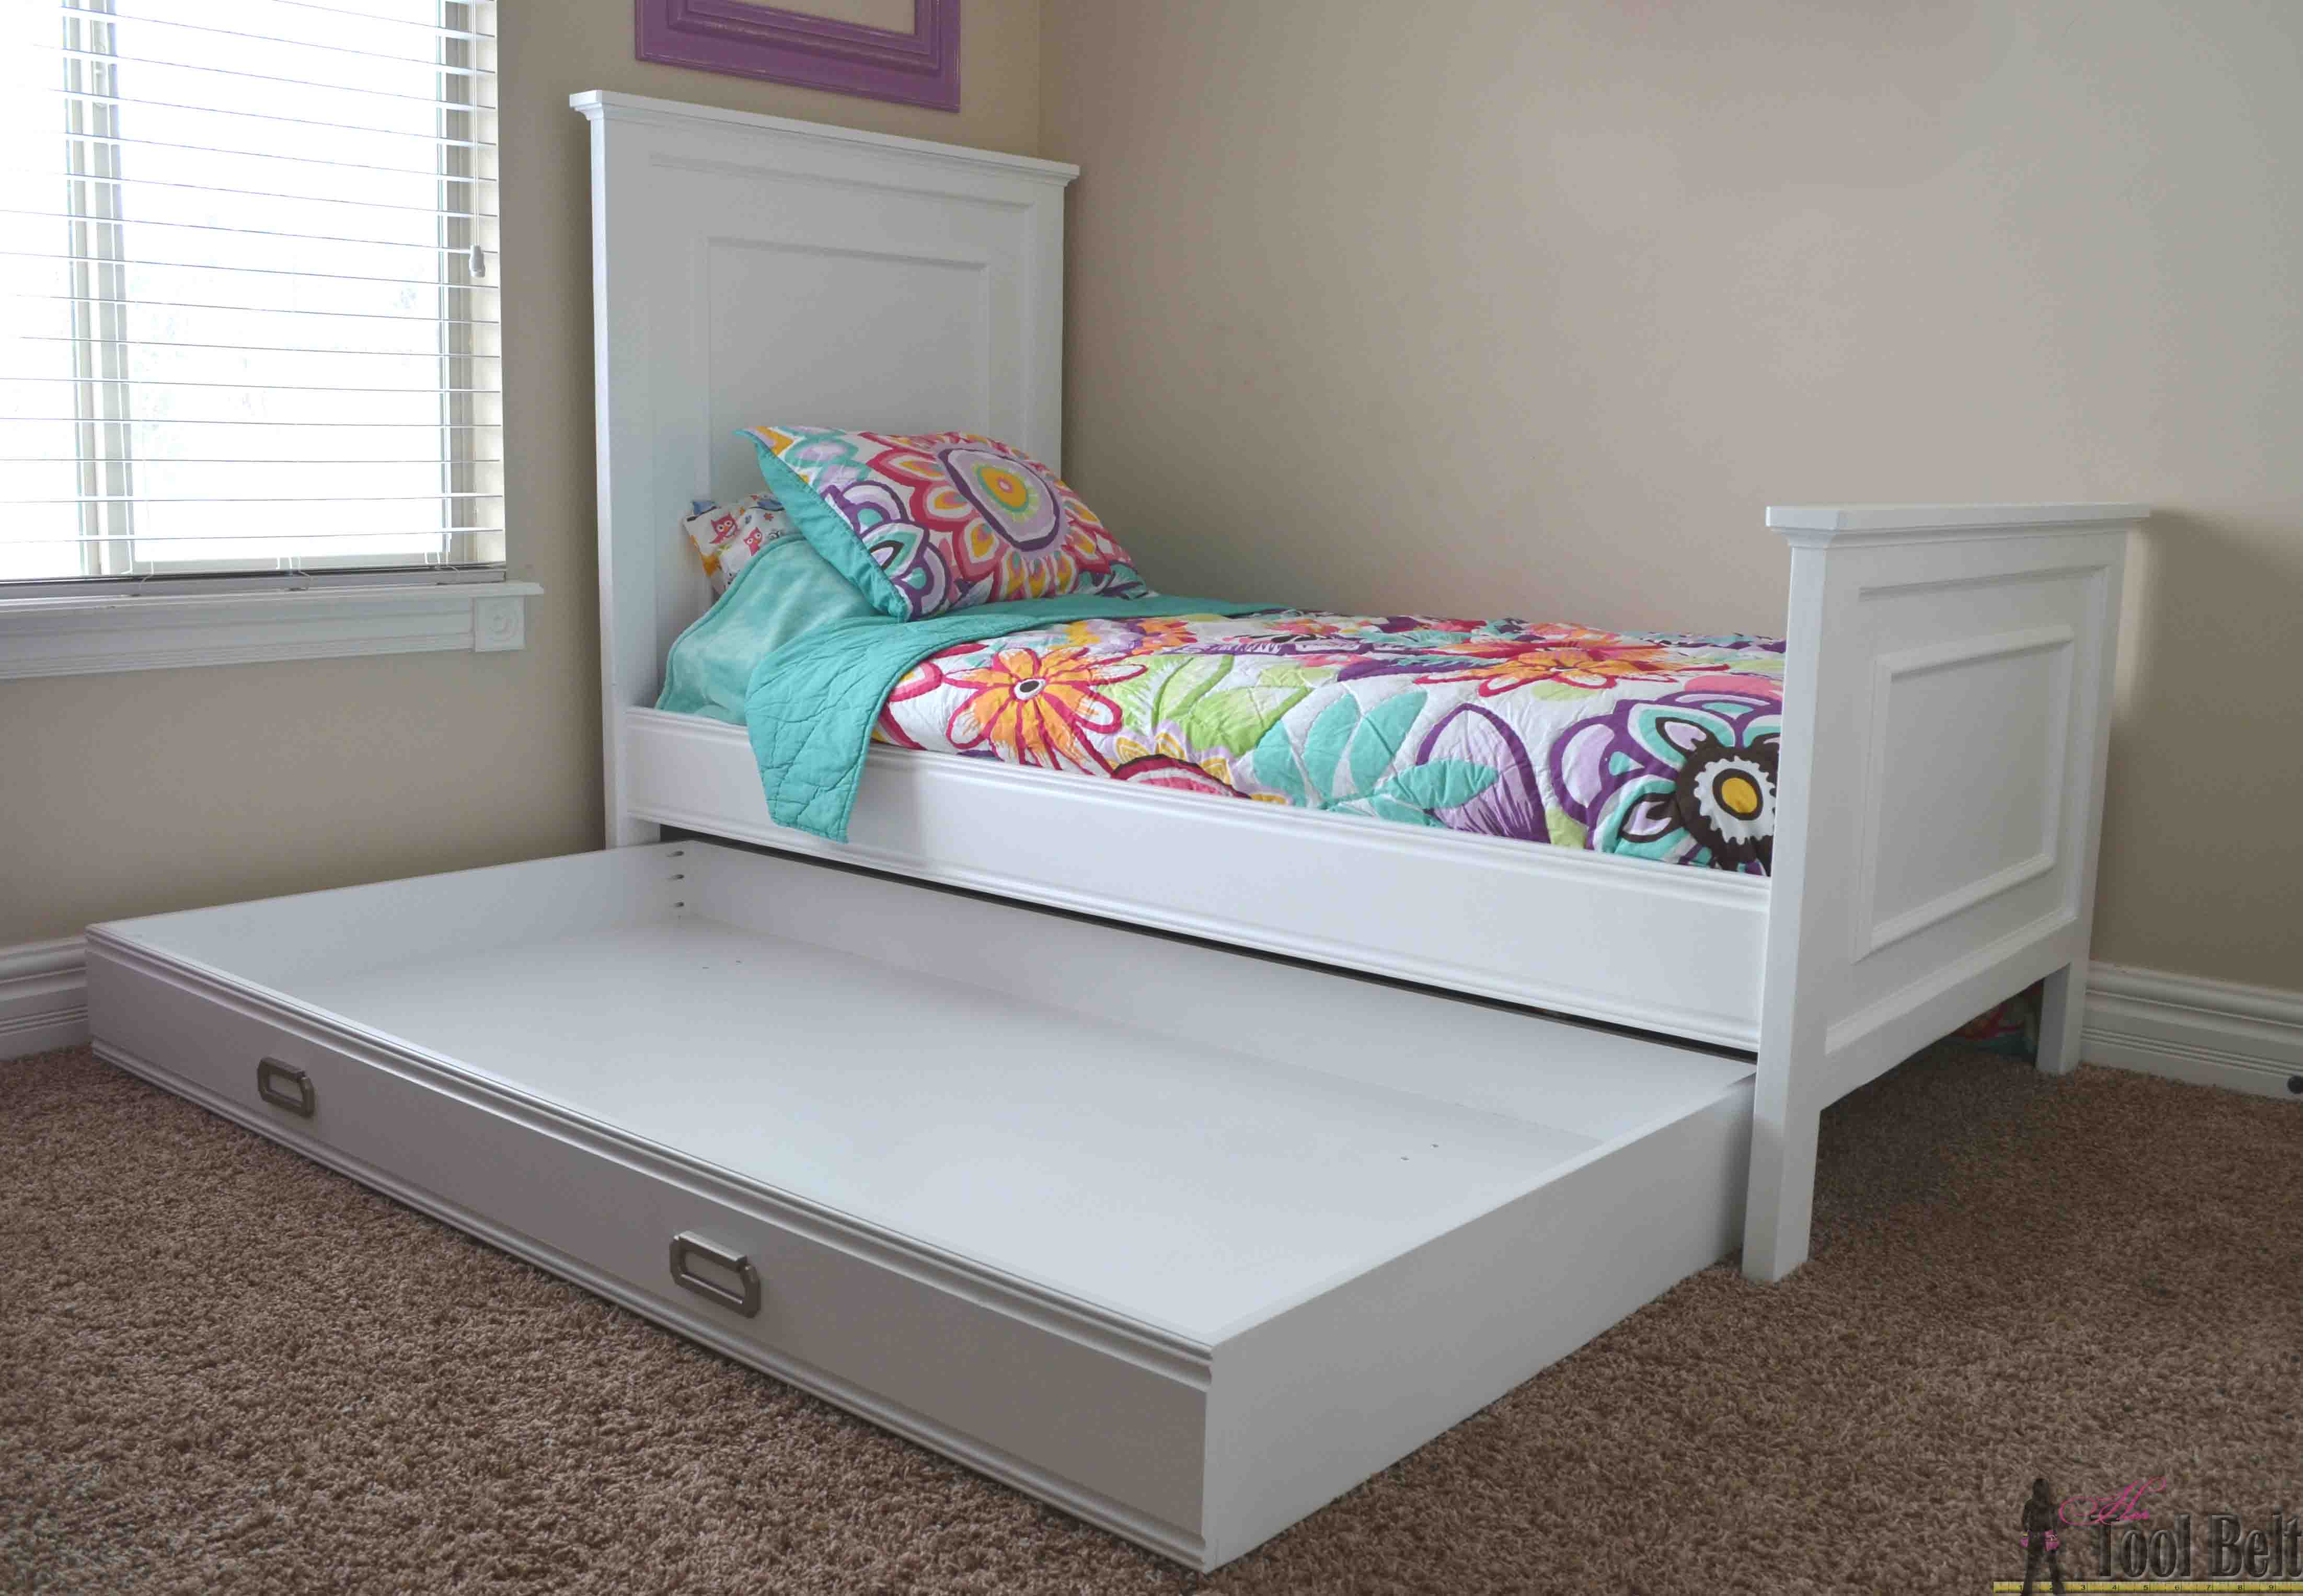 Simple Twin Bed Trundle Her Tool Belt, Twin Bed With Storage And Trundle